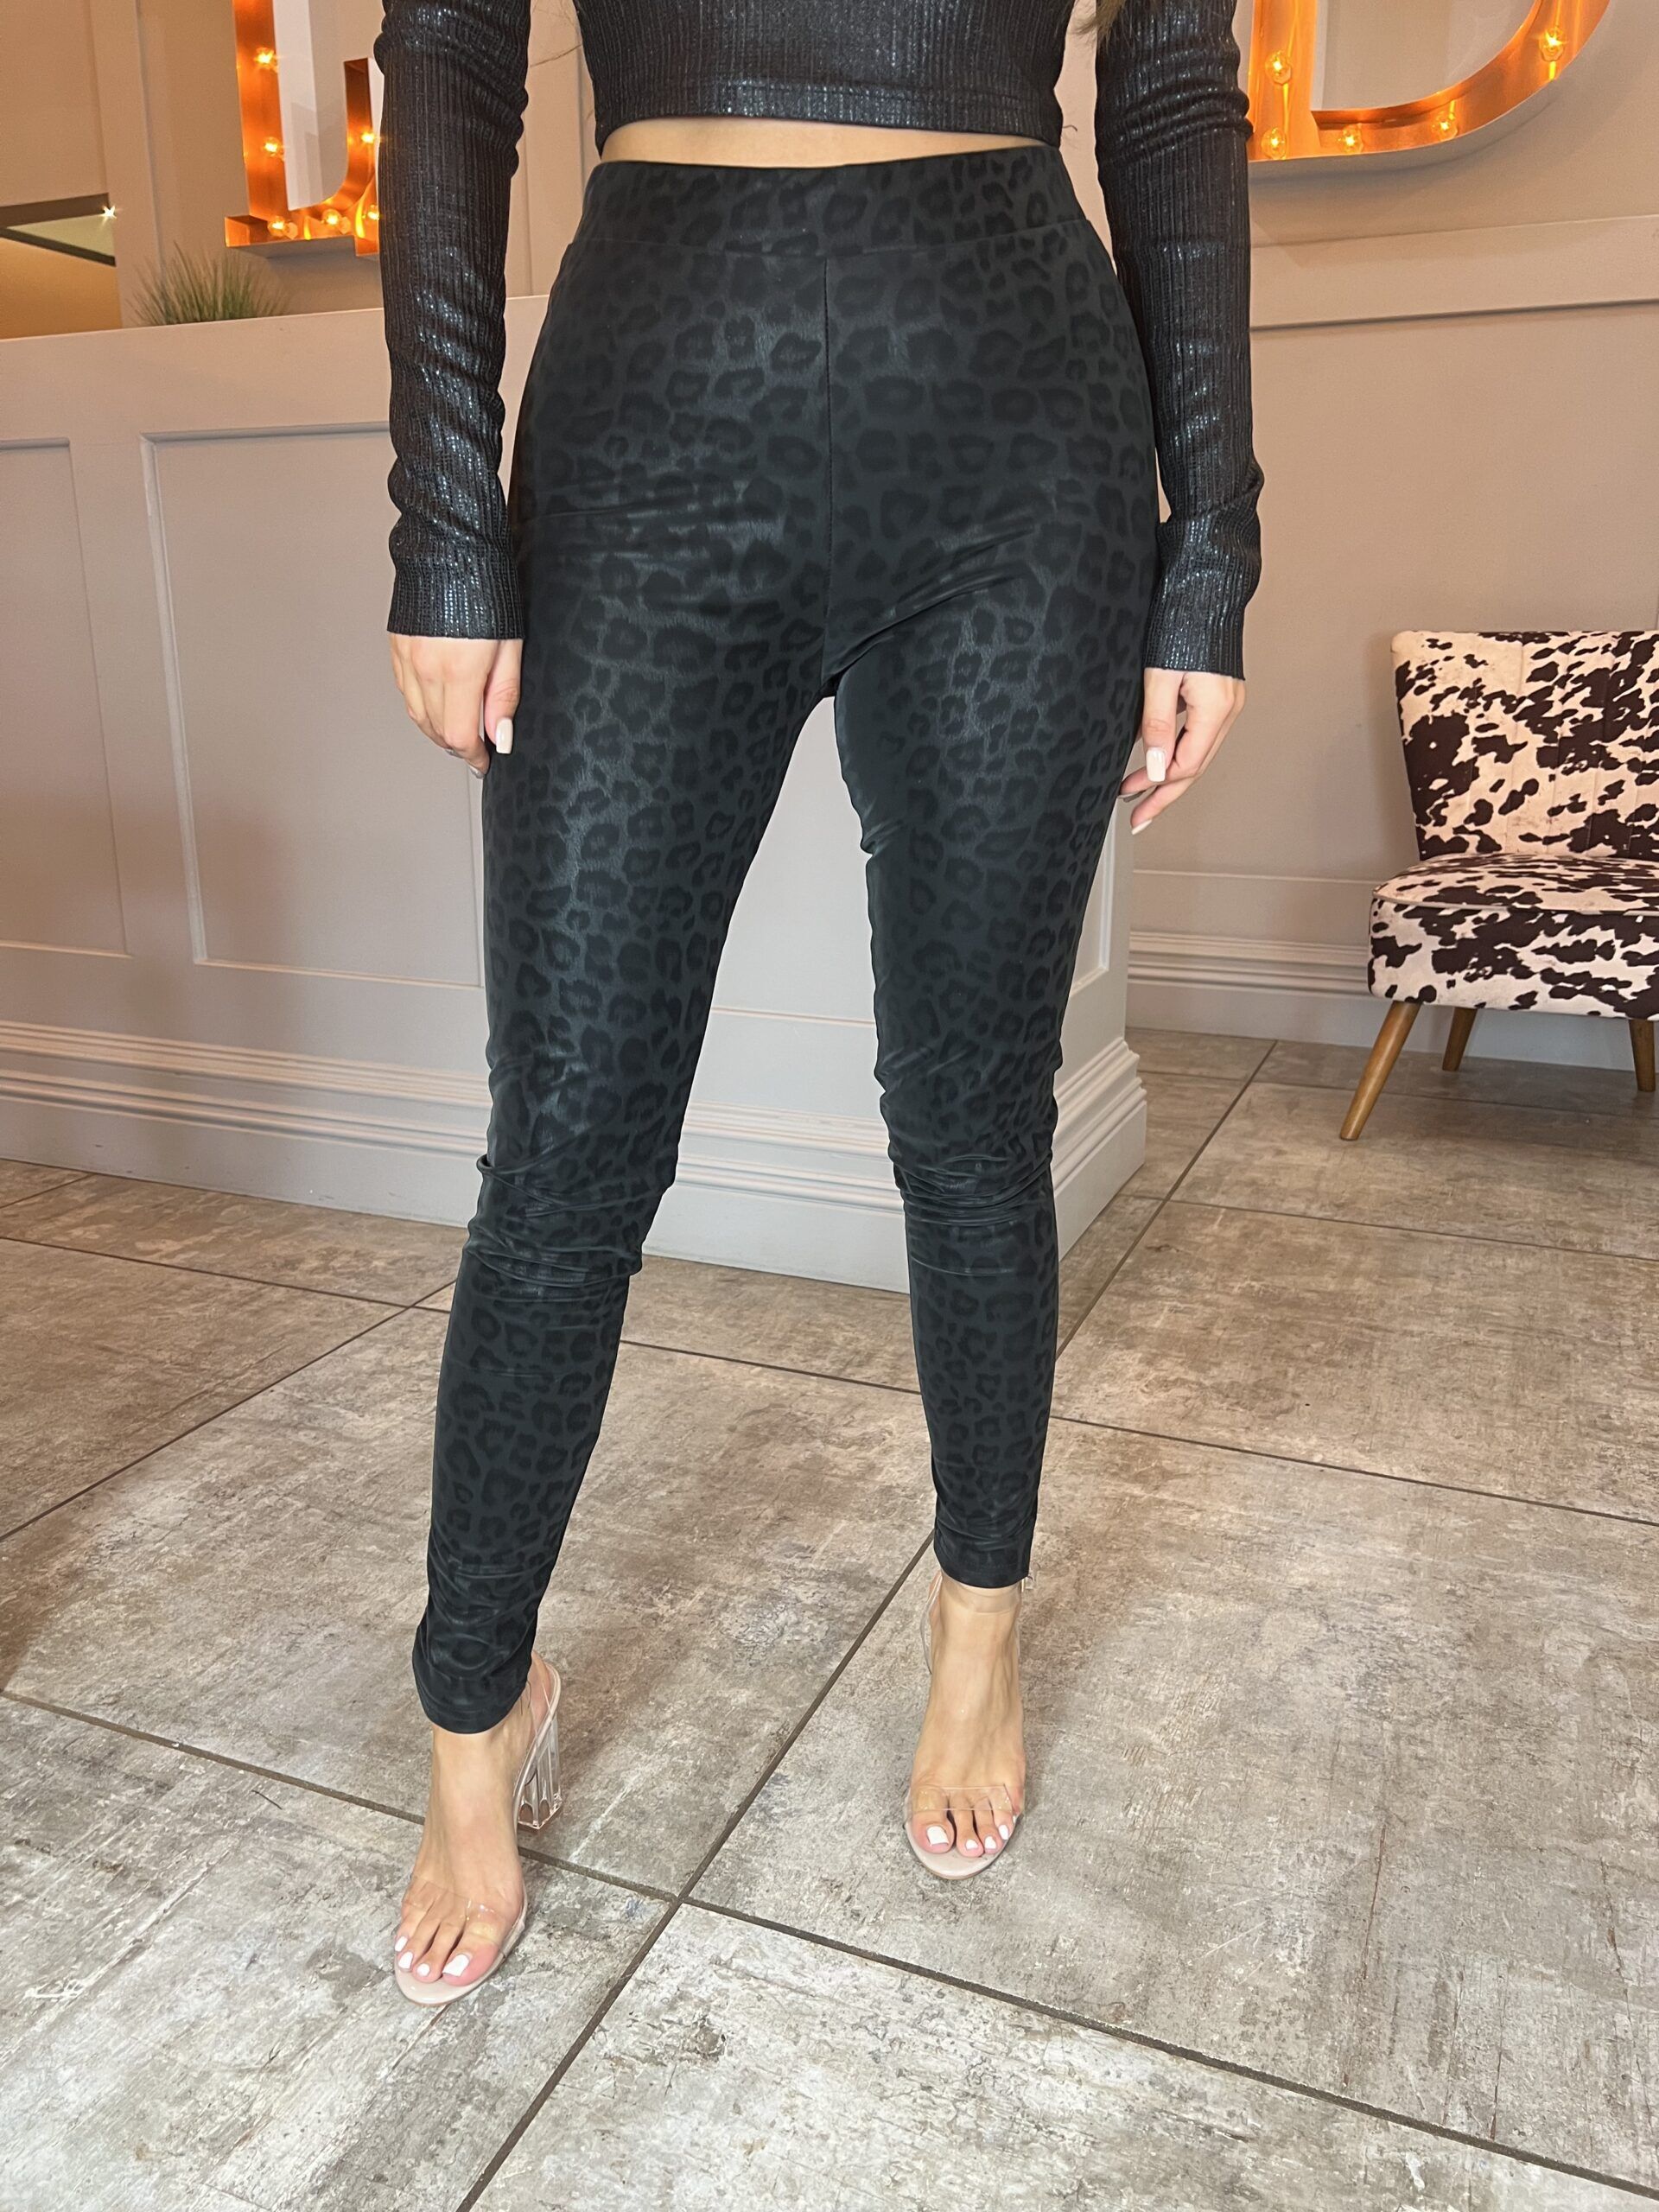 Discover more than 128 snake print leggings outfit super hot